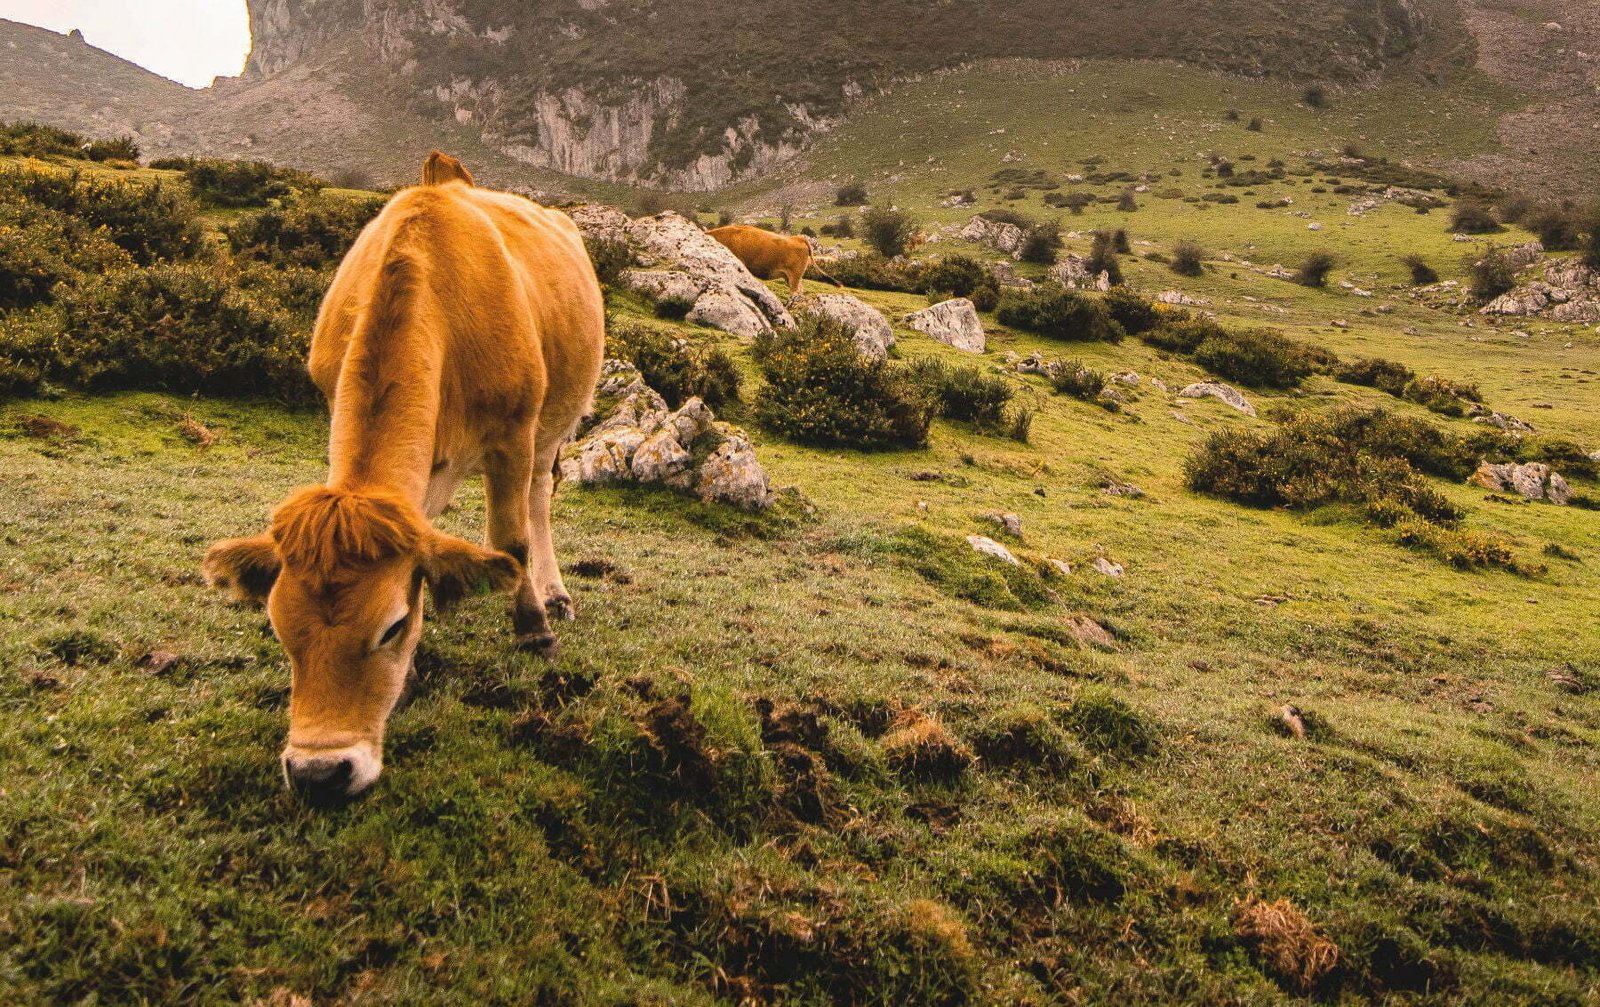 A landscape shot of some cows grazing in the mountainous regions of Asturias, Spain